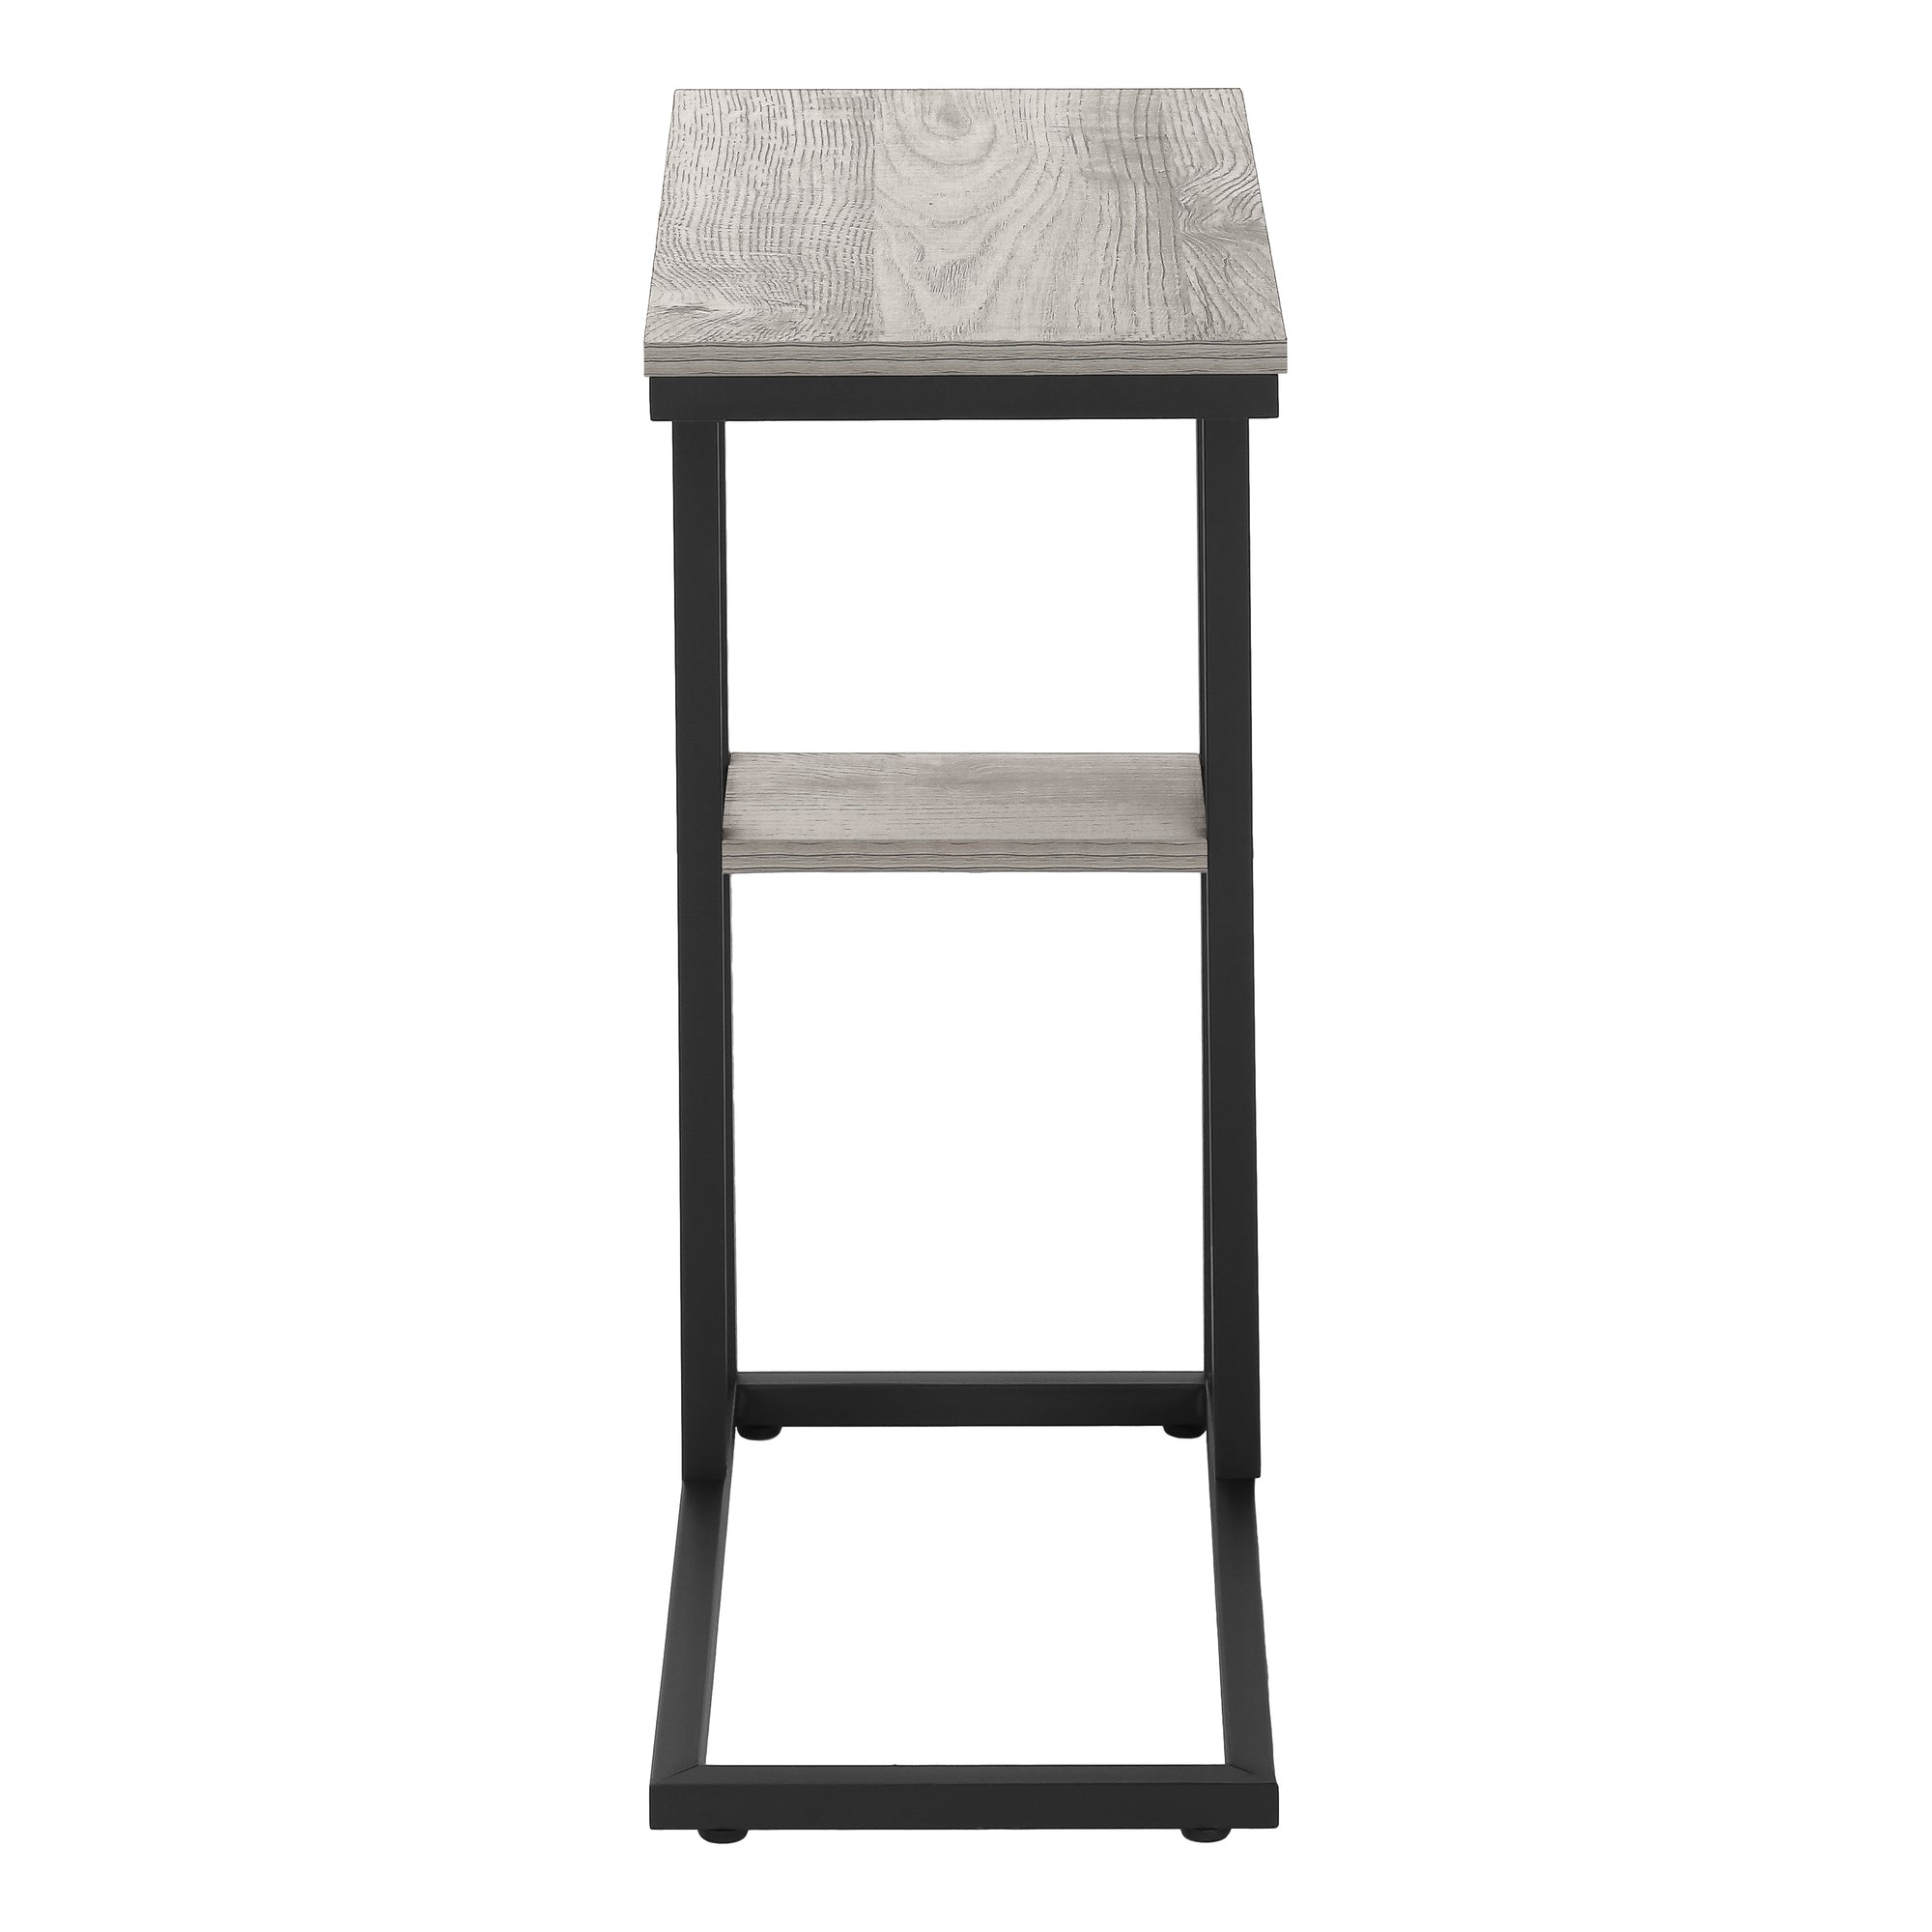 MN-173671    Accent Table, C-Shaped, End, Side, Snack, Living Room, Bedroom, Metal Legs, Laminate, Grey, Black, Contemporary, Modern